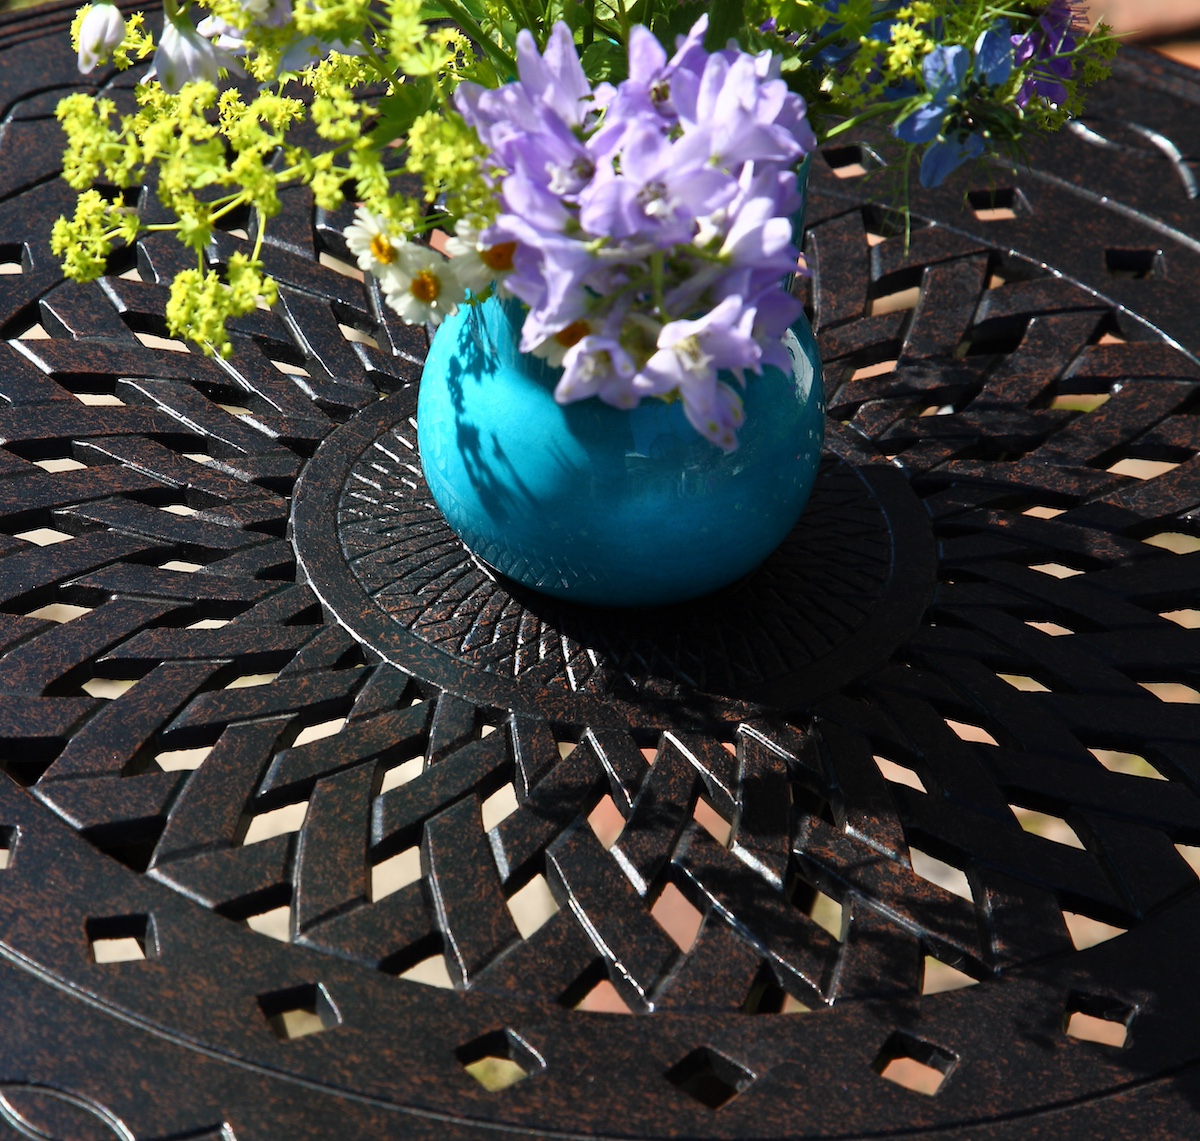 Get your cast aluminium garden furniture ready in 10-steps | 10. Style